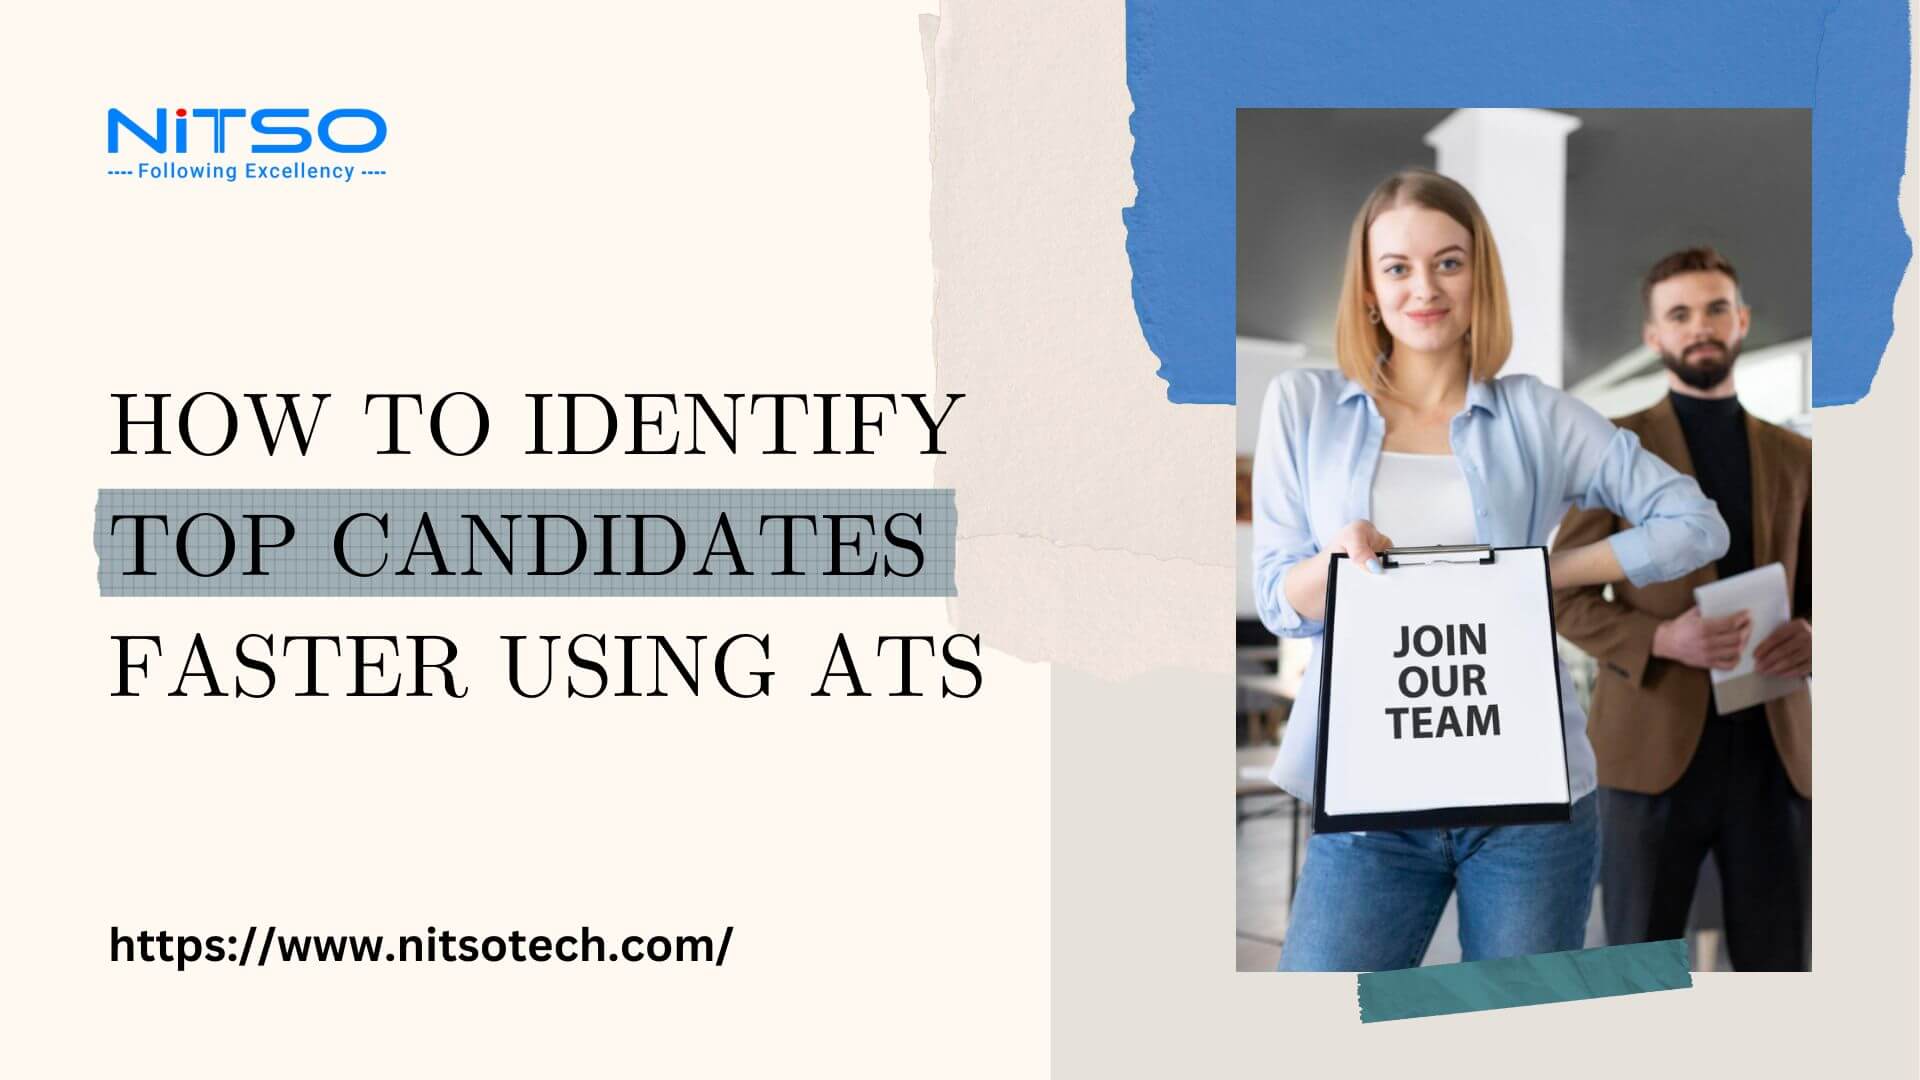 Transform how you leverage ATS to identify top applicants faster